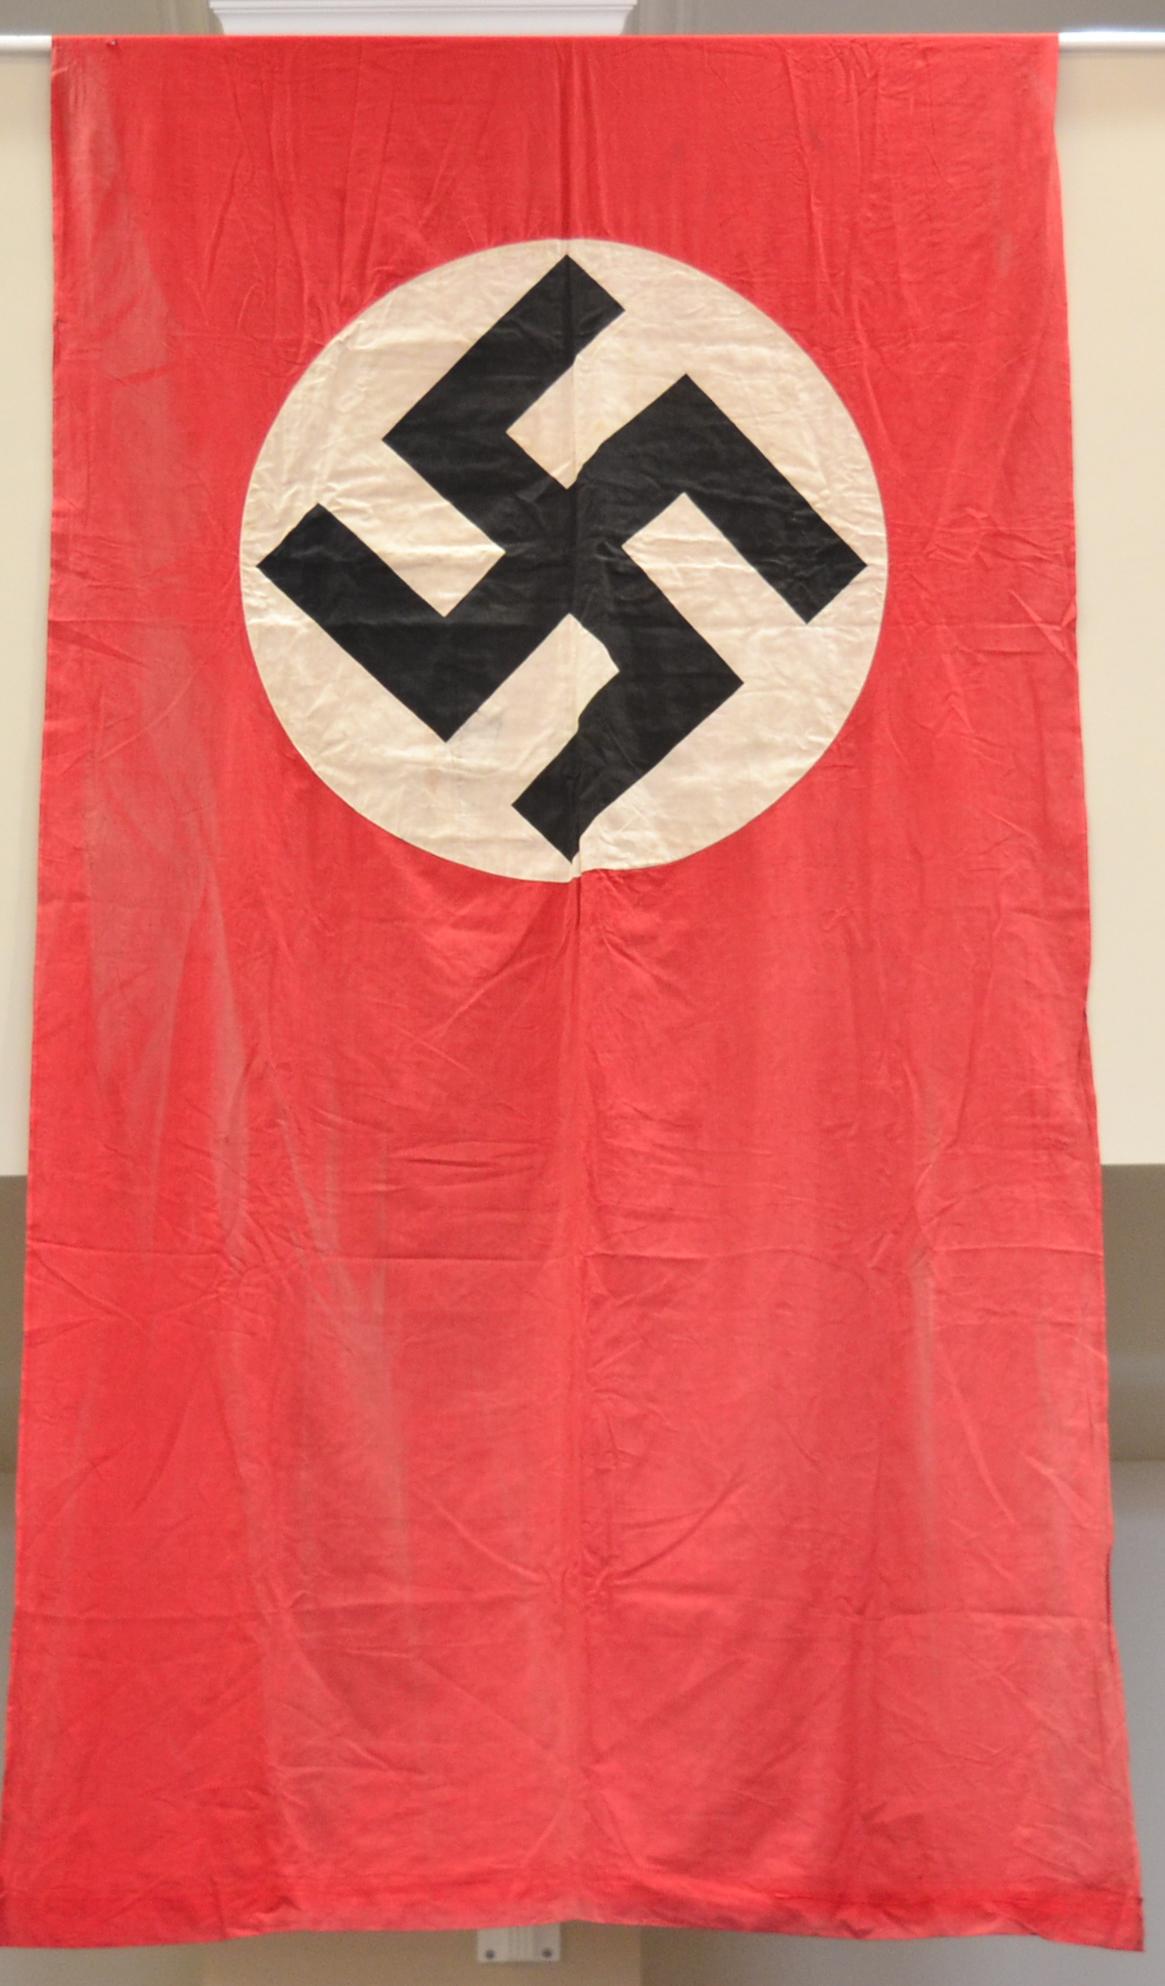 A German Third Reich NSDAP Standard Hanging Banner, with hemmed ends, each side of the scarlet